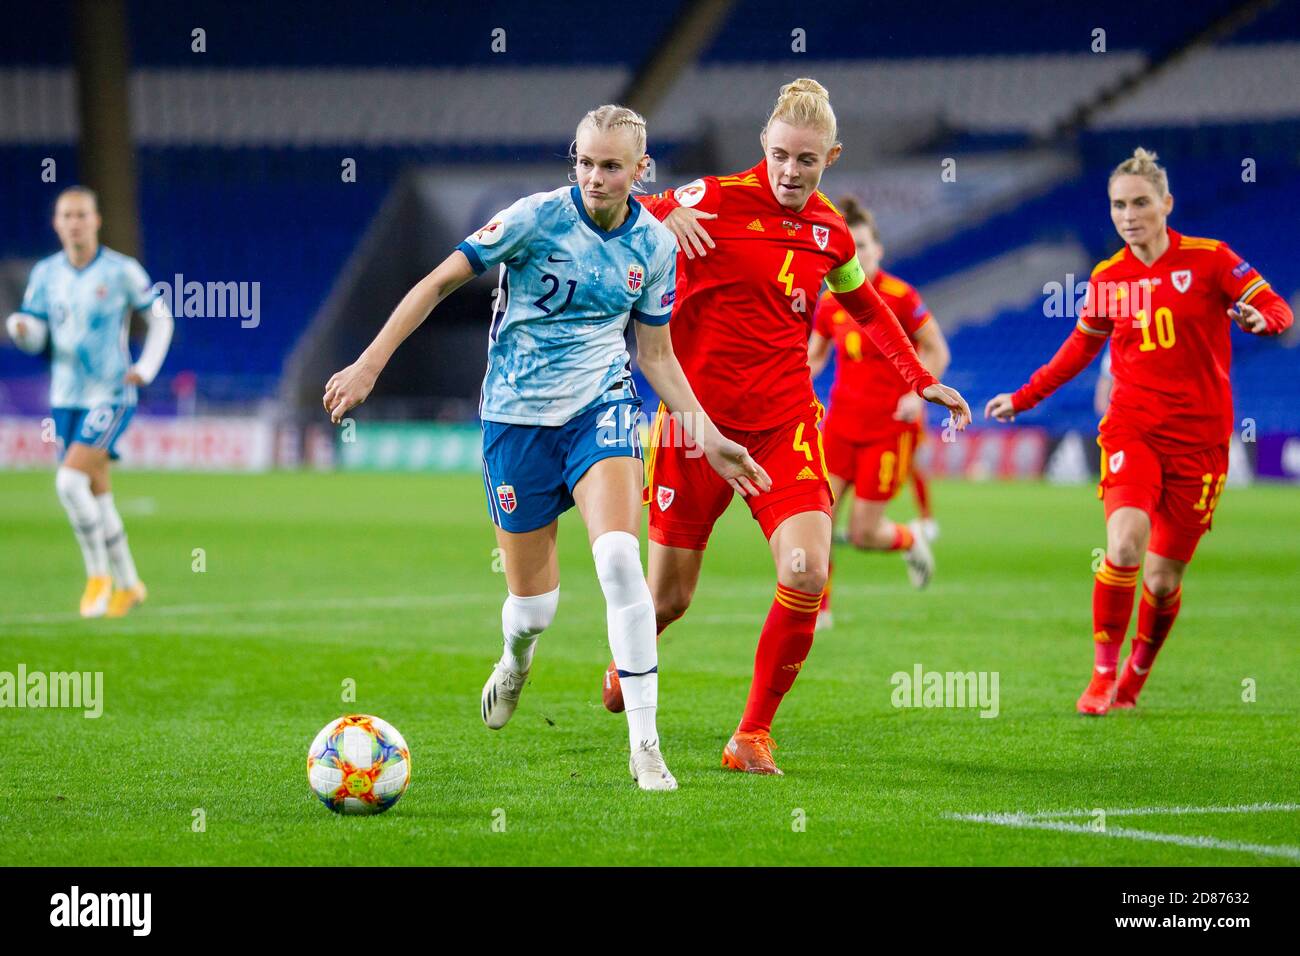 Cardiff, Wales, UK. 27th Oct, 2020. Karina Saevik of Norway and Sophie Ingle of Wales during the UEFA Women's Euro 2022 qualification match between Wales and Norway at Cardiff City Stadium. Credit: Mark Hawkins/Alamy Live News Stock Photo